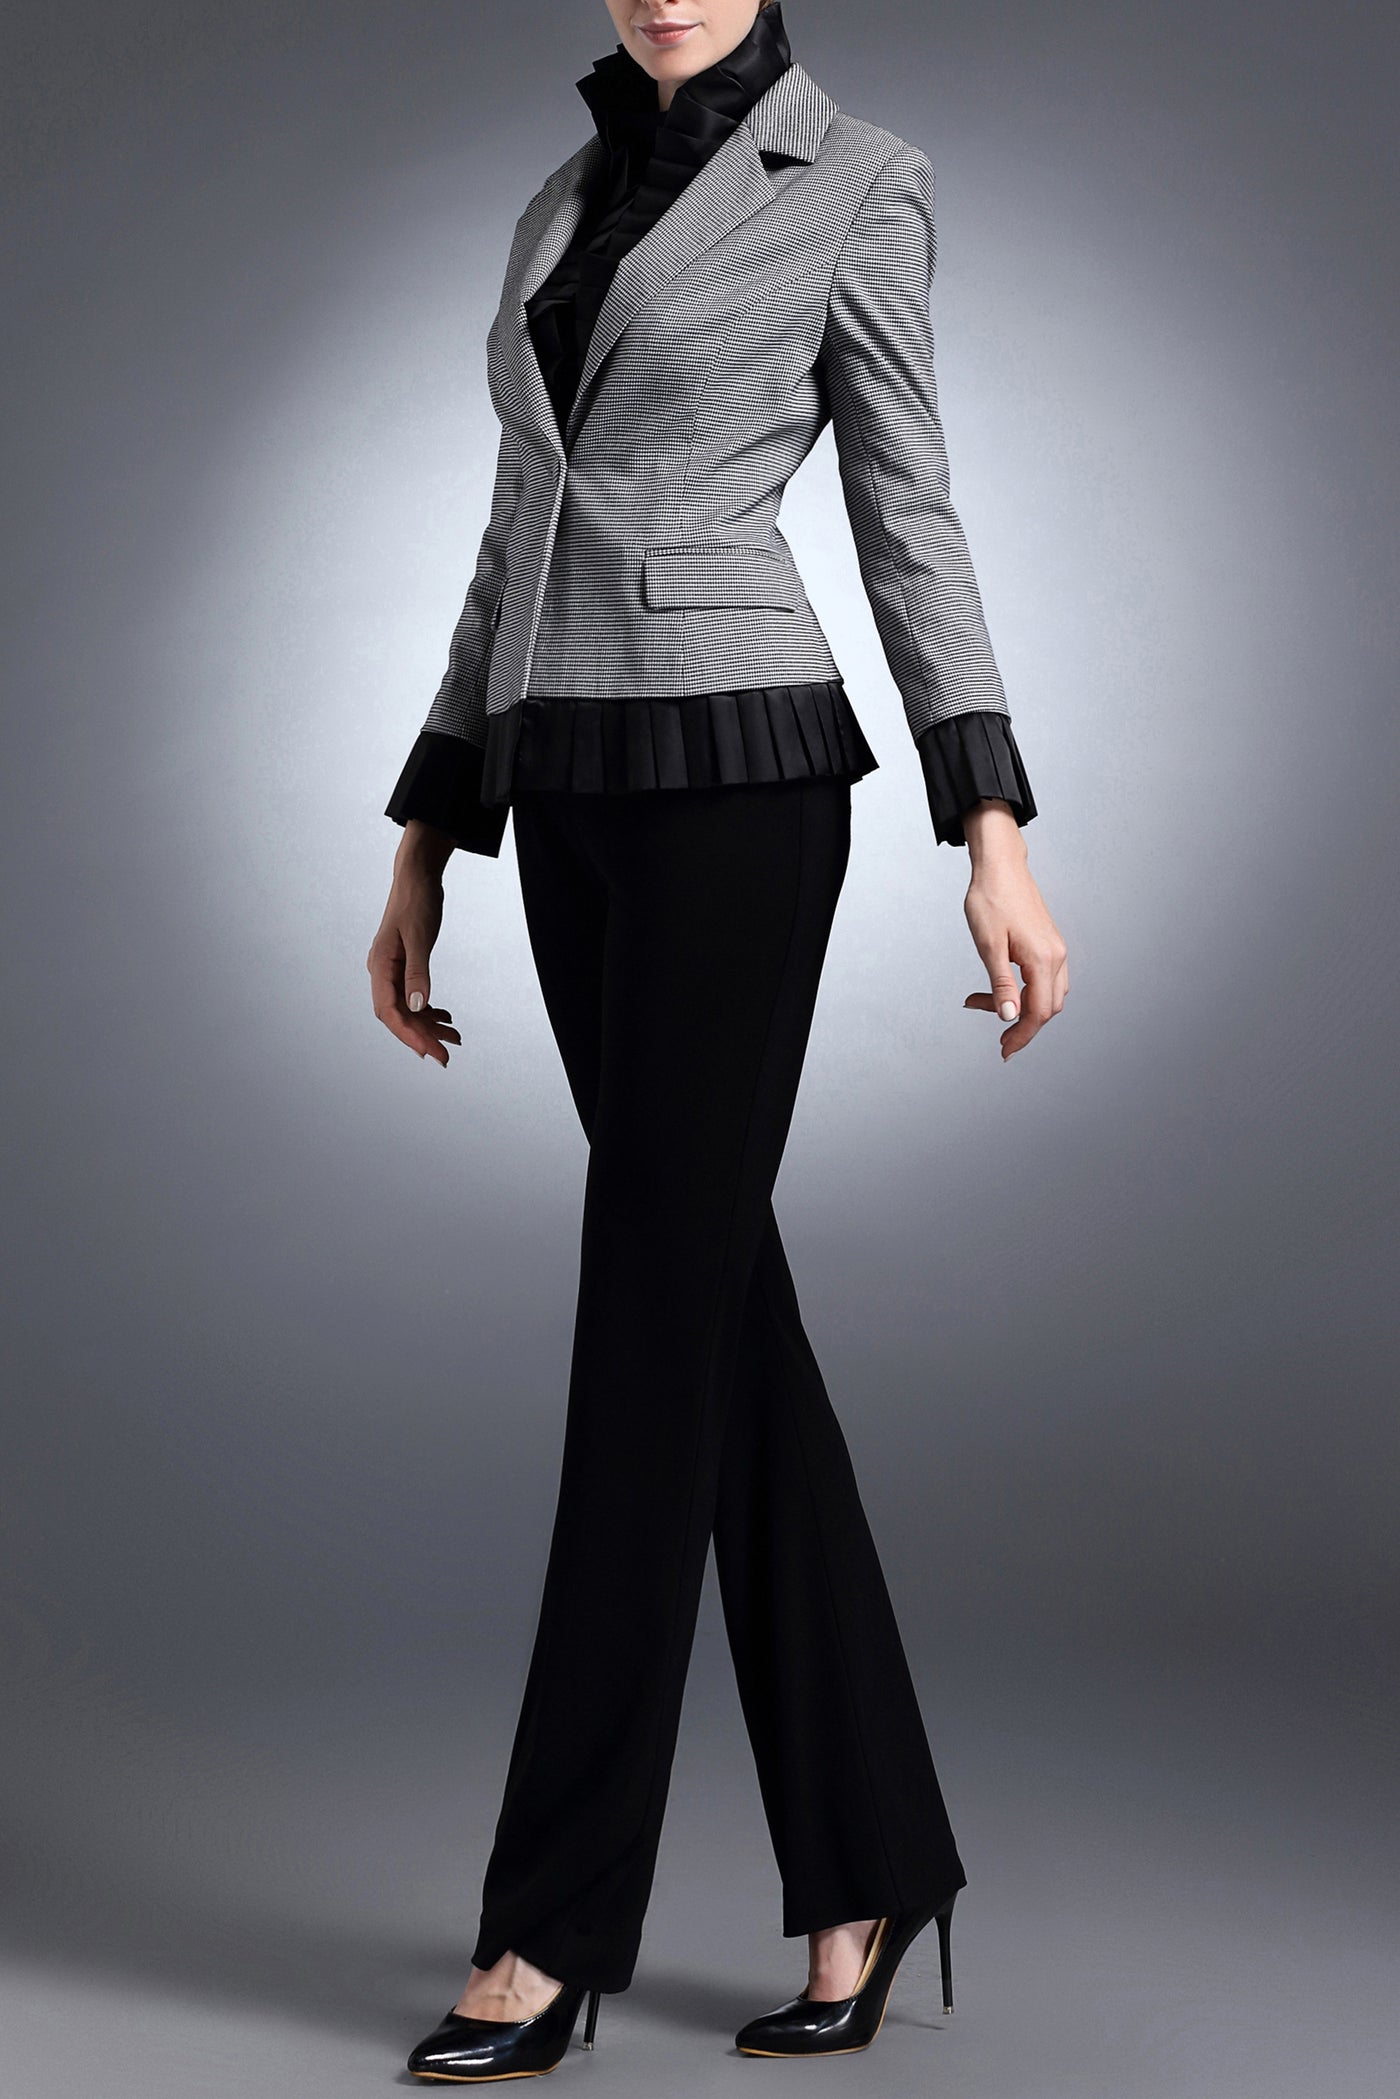 DL Signature Executive Wendy Suits